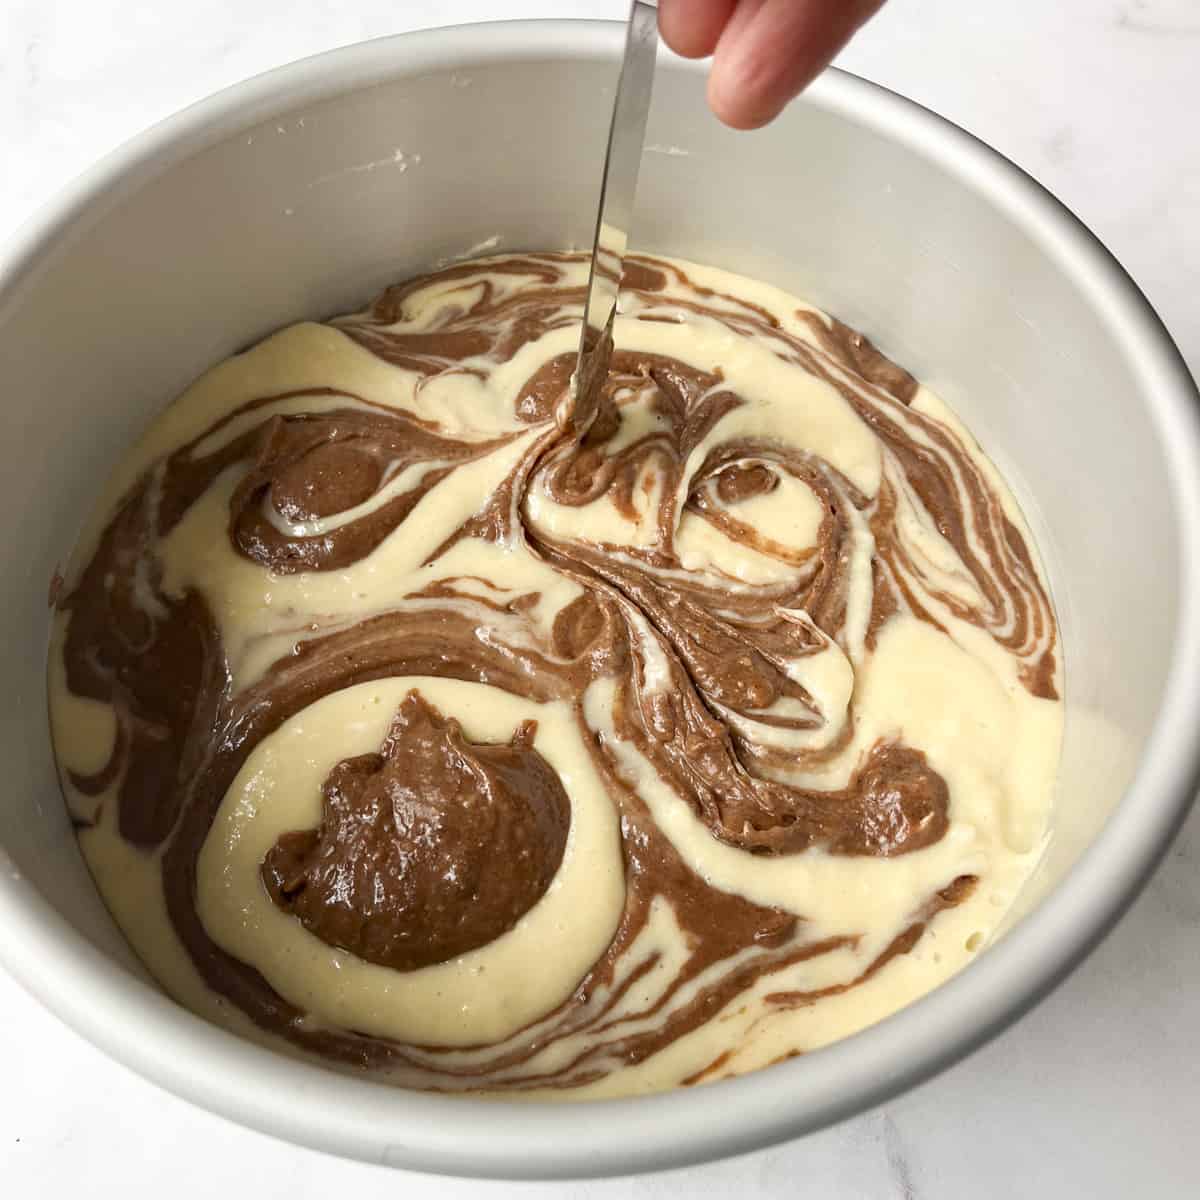 vanilla and chocolate cake batter being swirled with a knife in a cake pan